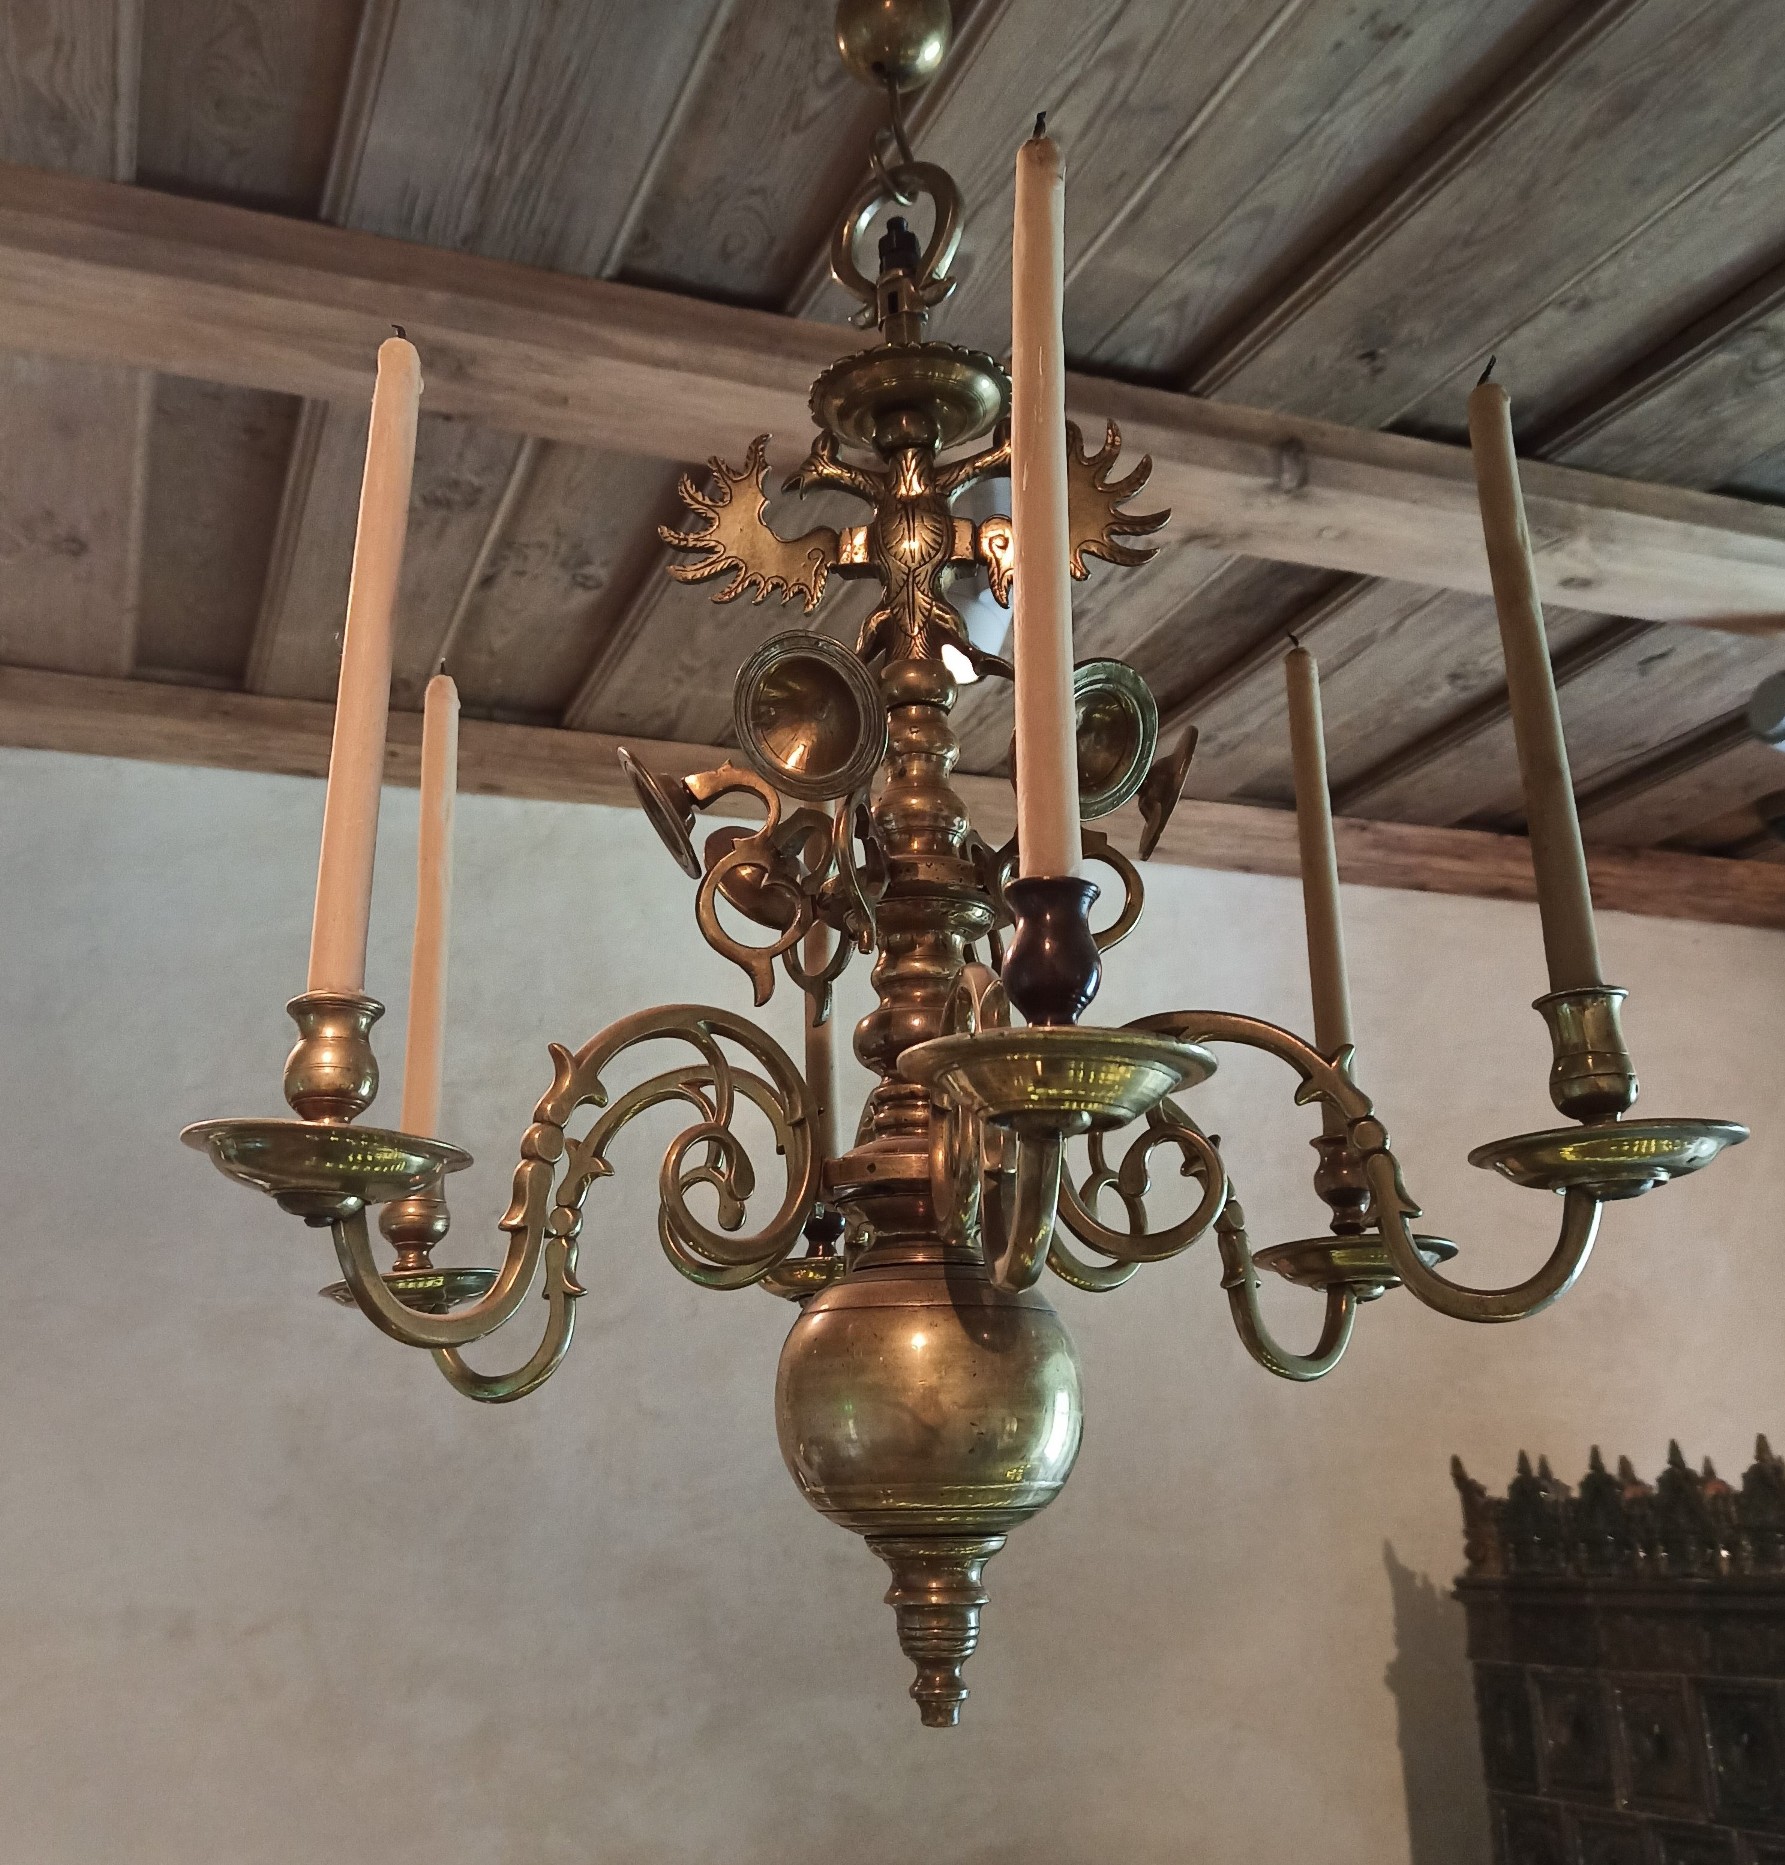 Chandelier, 18th c., VRVM 51936, Museum of the History of Riga and Navigation. Photo by Maruta Eistere, 2022